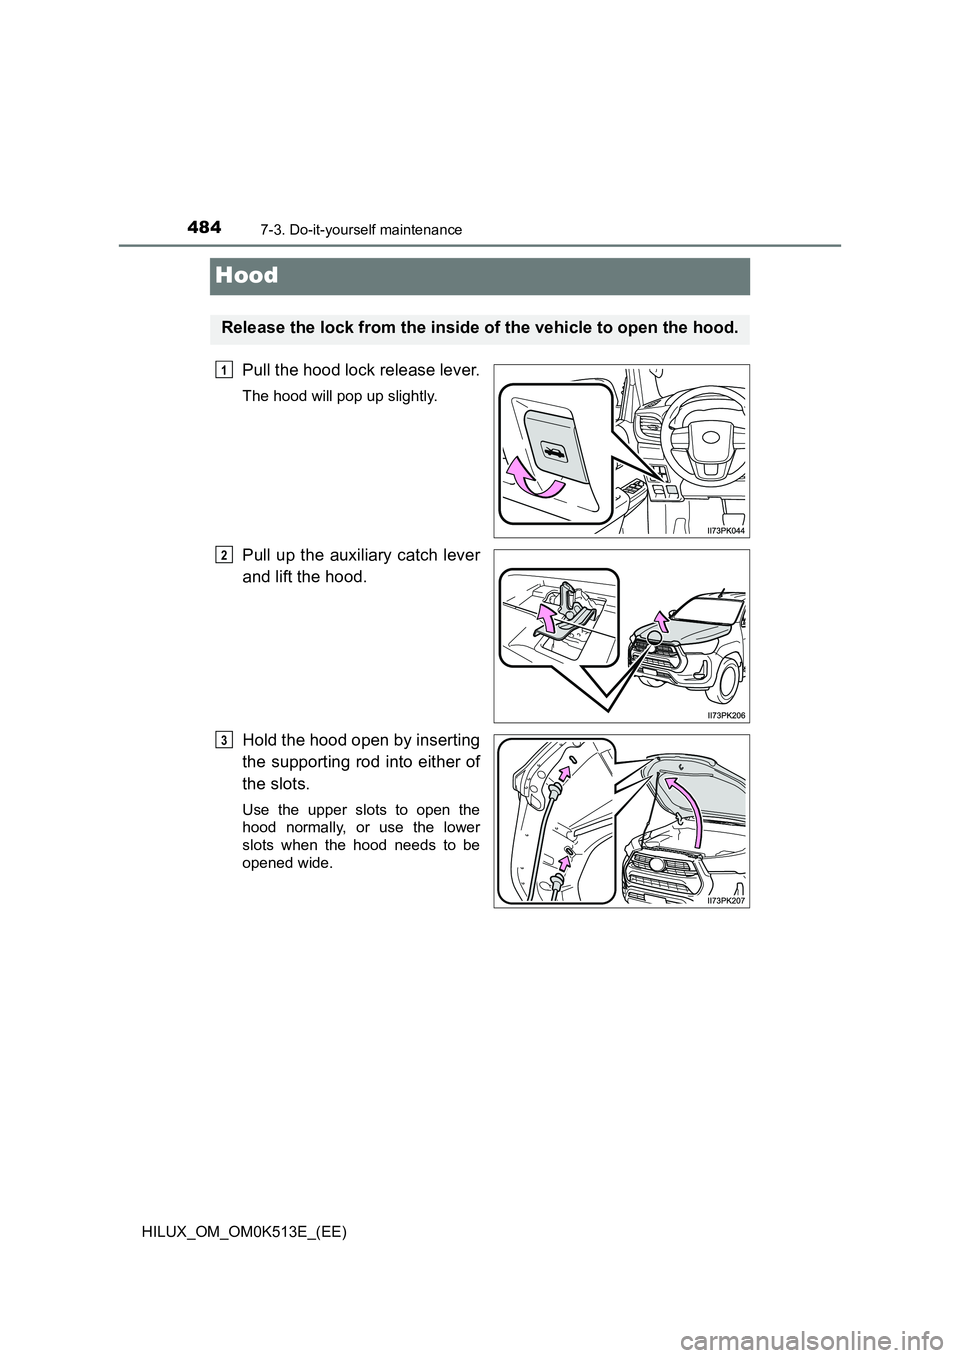 TOYOTA HILUX 2021  Owners Manual (in English) 4847-3. Do-it-yourself maintenance
HILUX_OM_OM0K513E_(EE)
Hood
Pull the hood lock release lever.
The hood will pop up slightly.
Pull up the auxiliary catch lever 
and lift the hood. 
Hold the hood ope